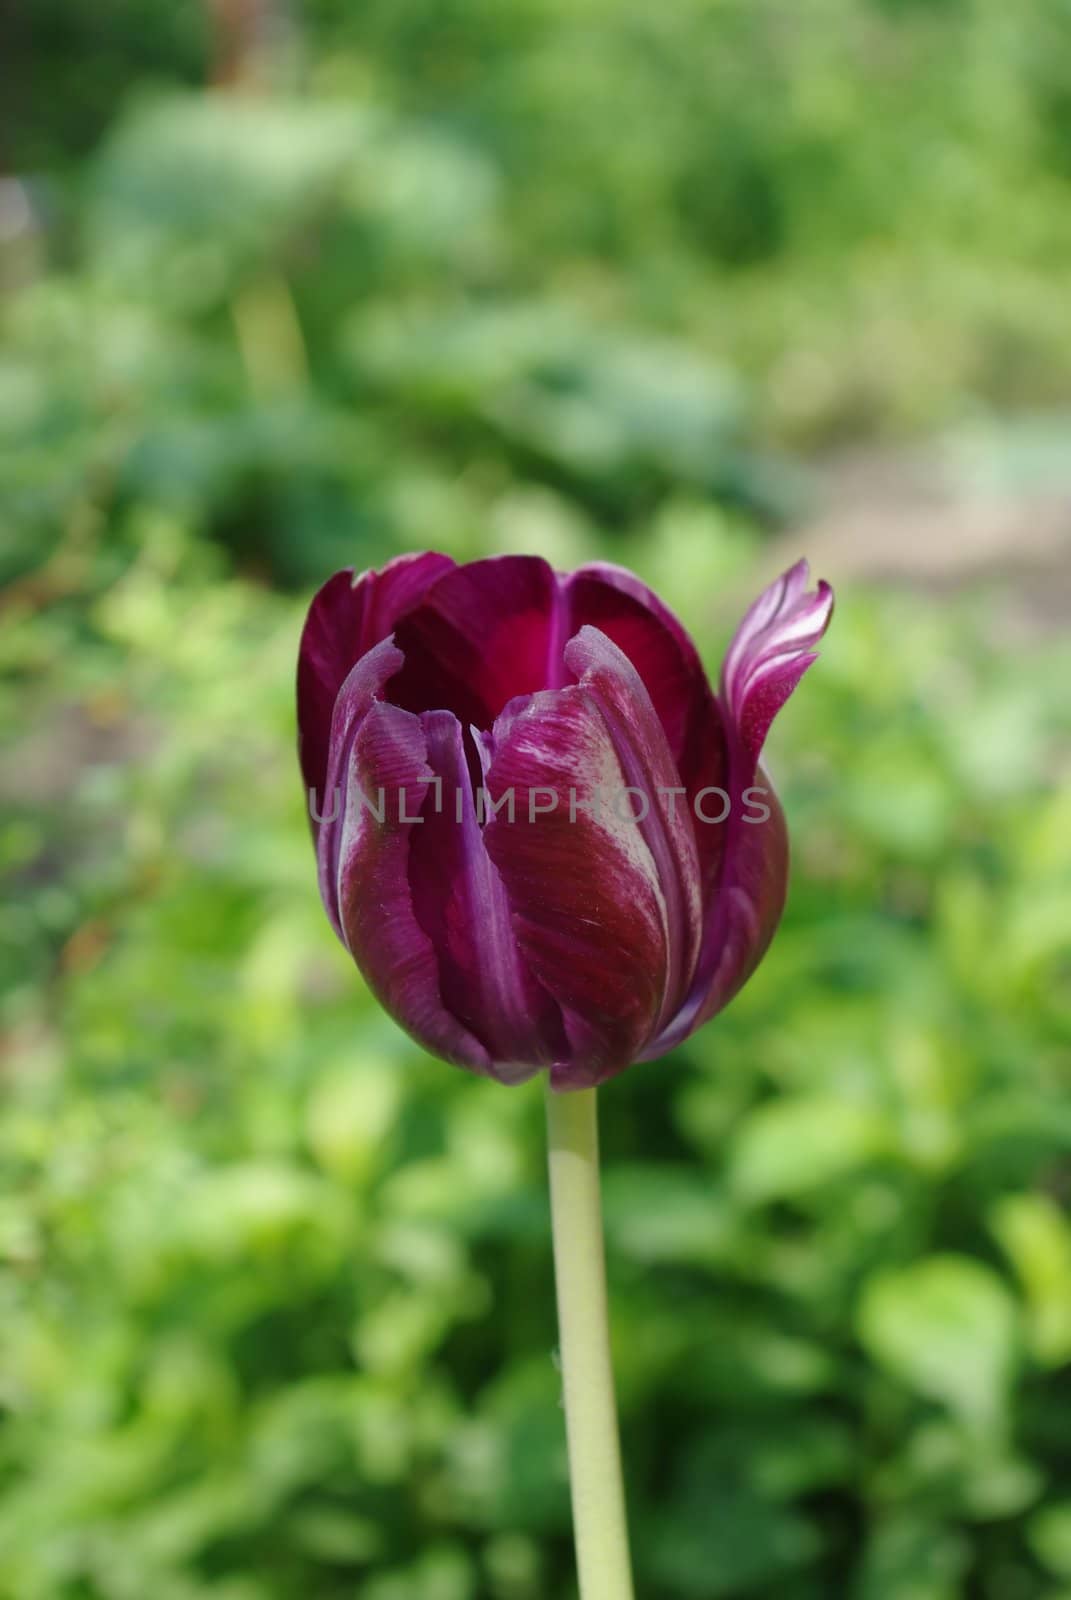 A dark purple tulip against a background of green leaves